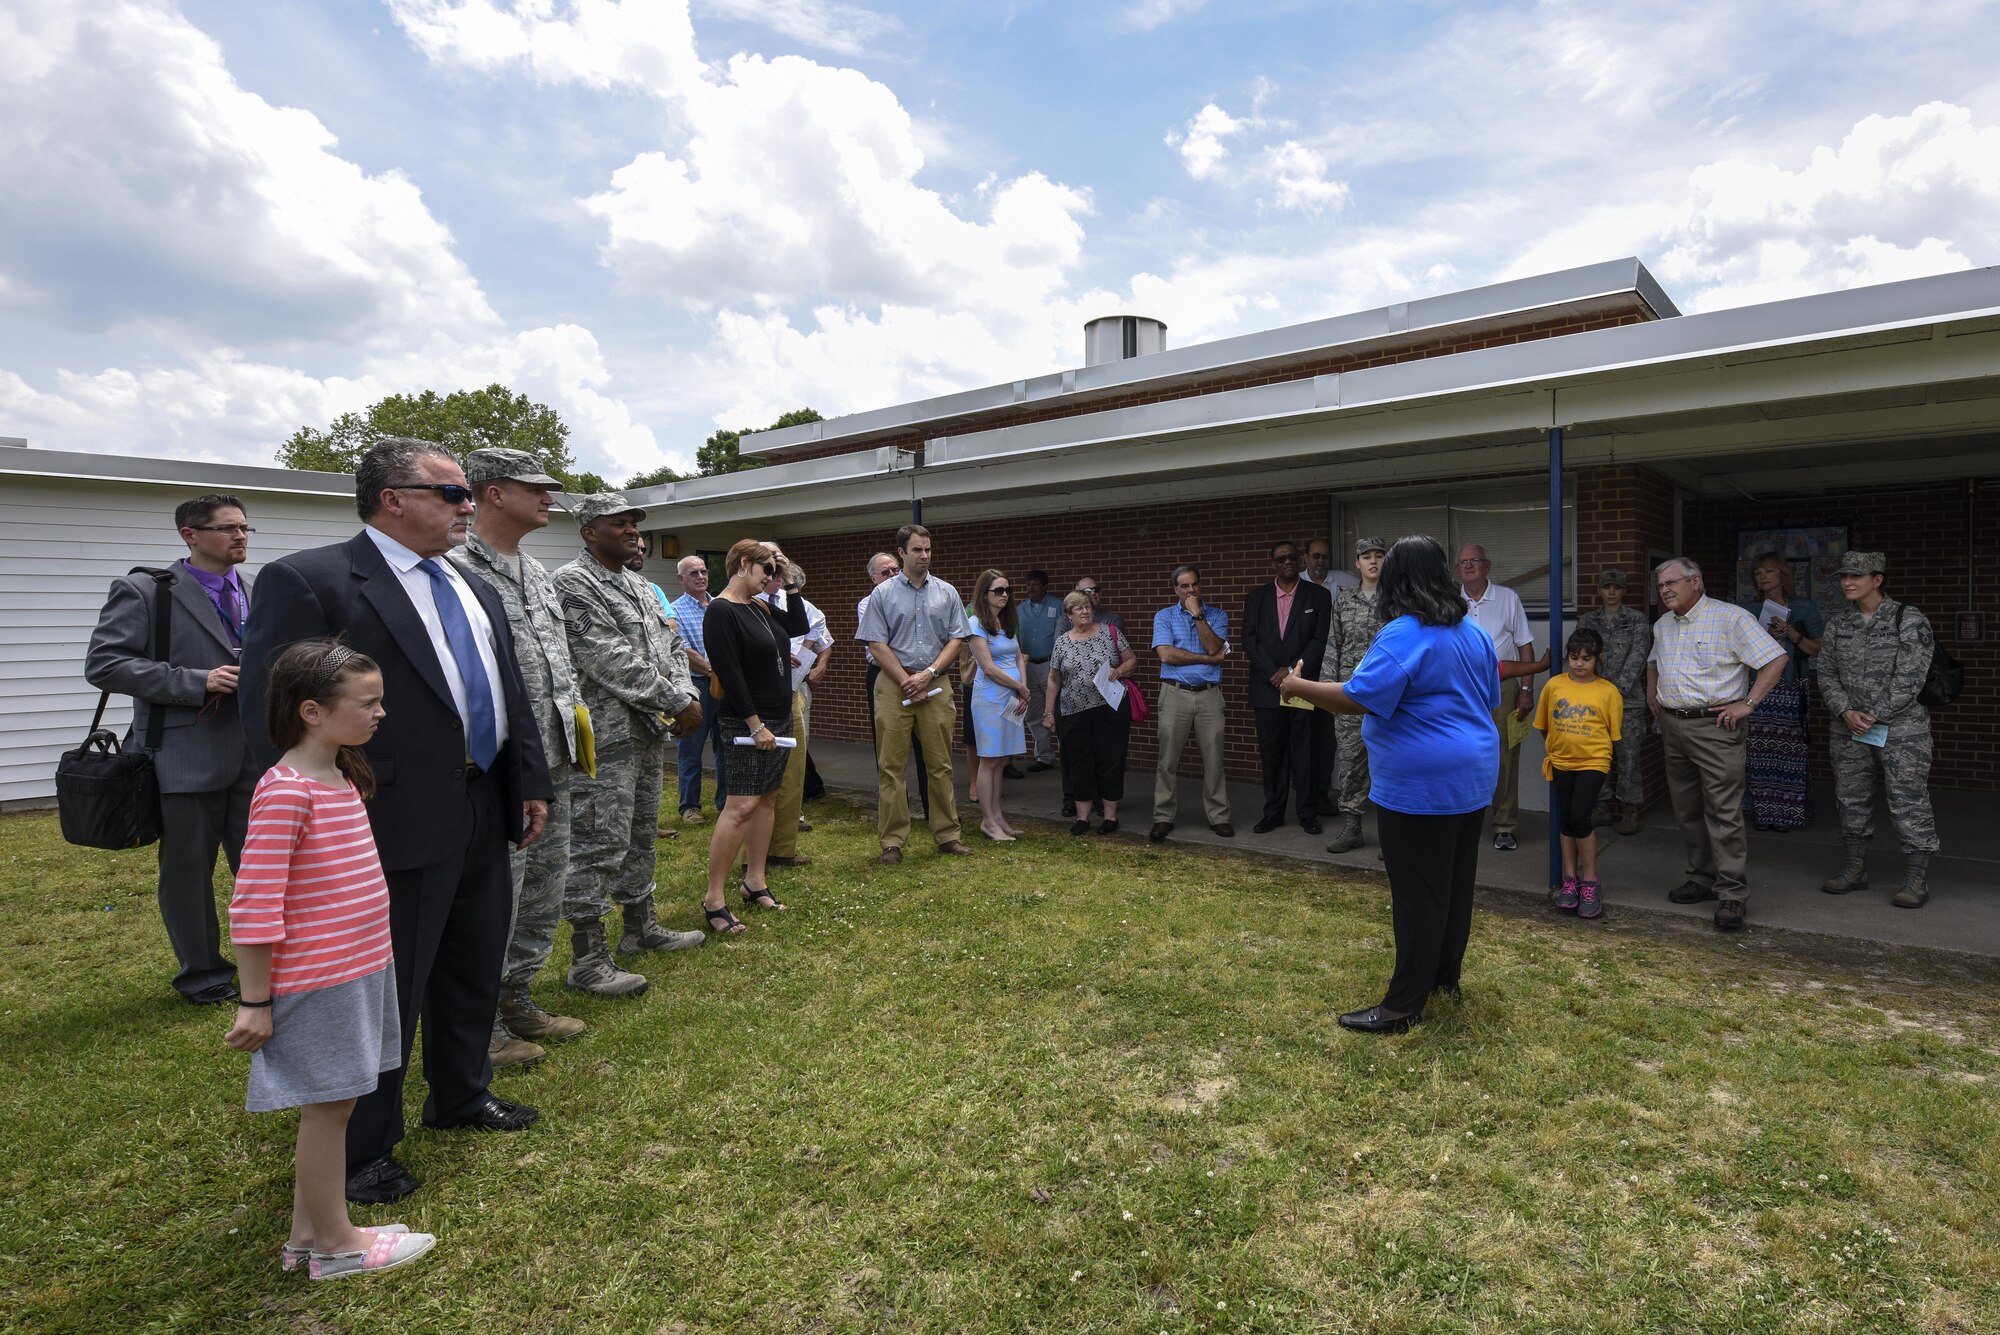 Karen Wellington Whichard, Meadow Lane Elementary School principal, speaks with leadership from both the 4th Fighter Wing and Wayne County during a tour, May 11, 2016, in Goldsboro, North Carolina. Whichard brought members into her school to show the conditions her teachers and students are teaching and learning in and what they’ve done to try to maintain the 1958 facility. (U.S. Air Force photo by Airman Shawna L. Keyes) 